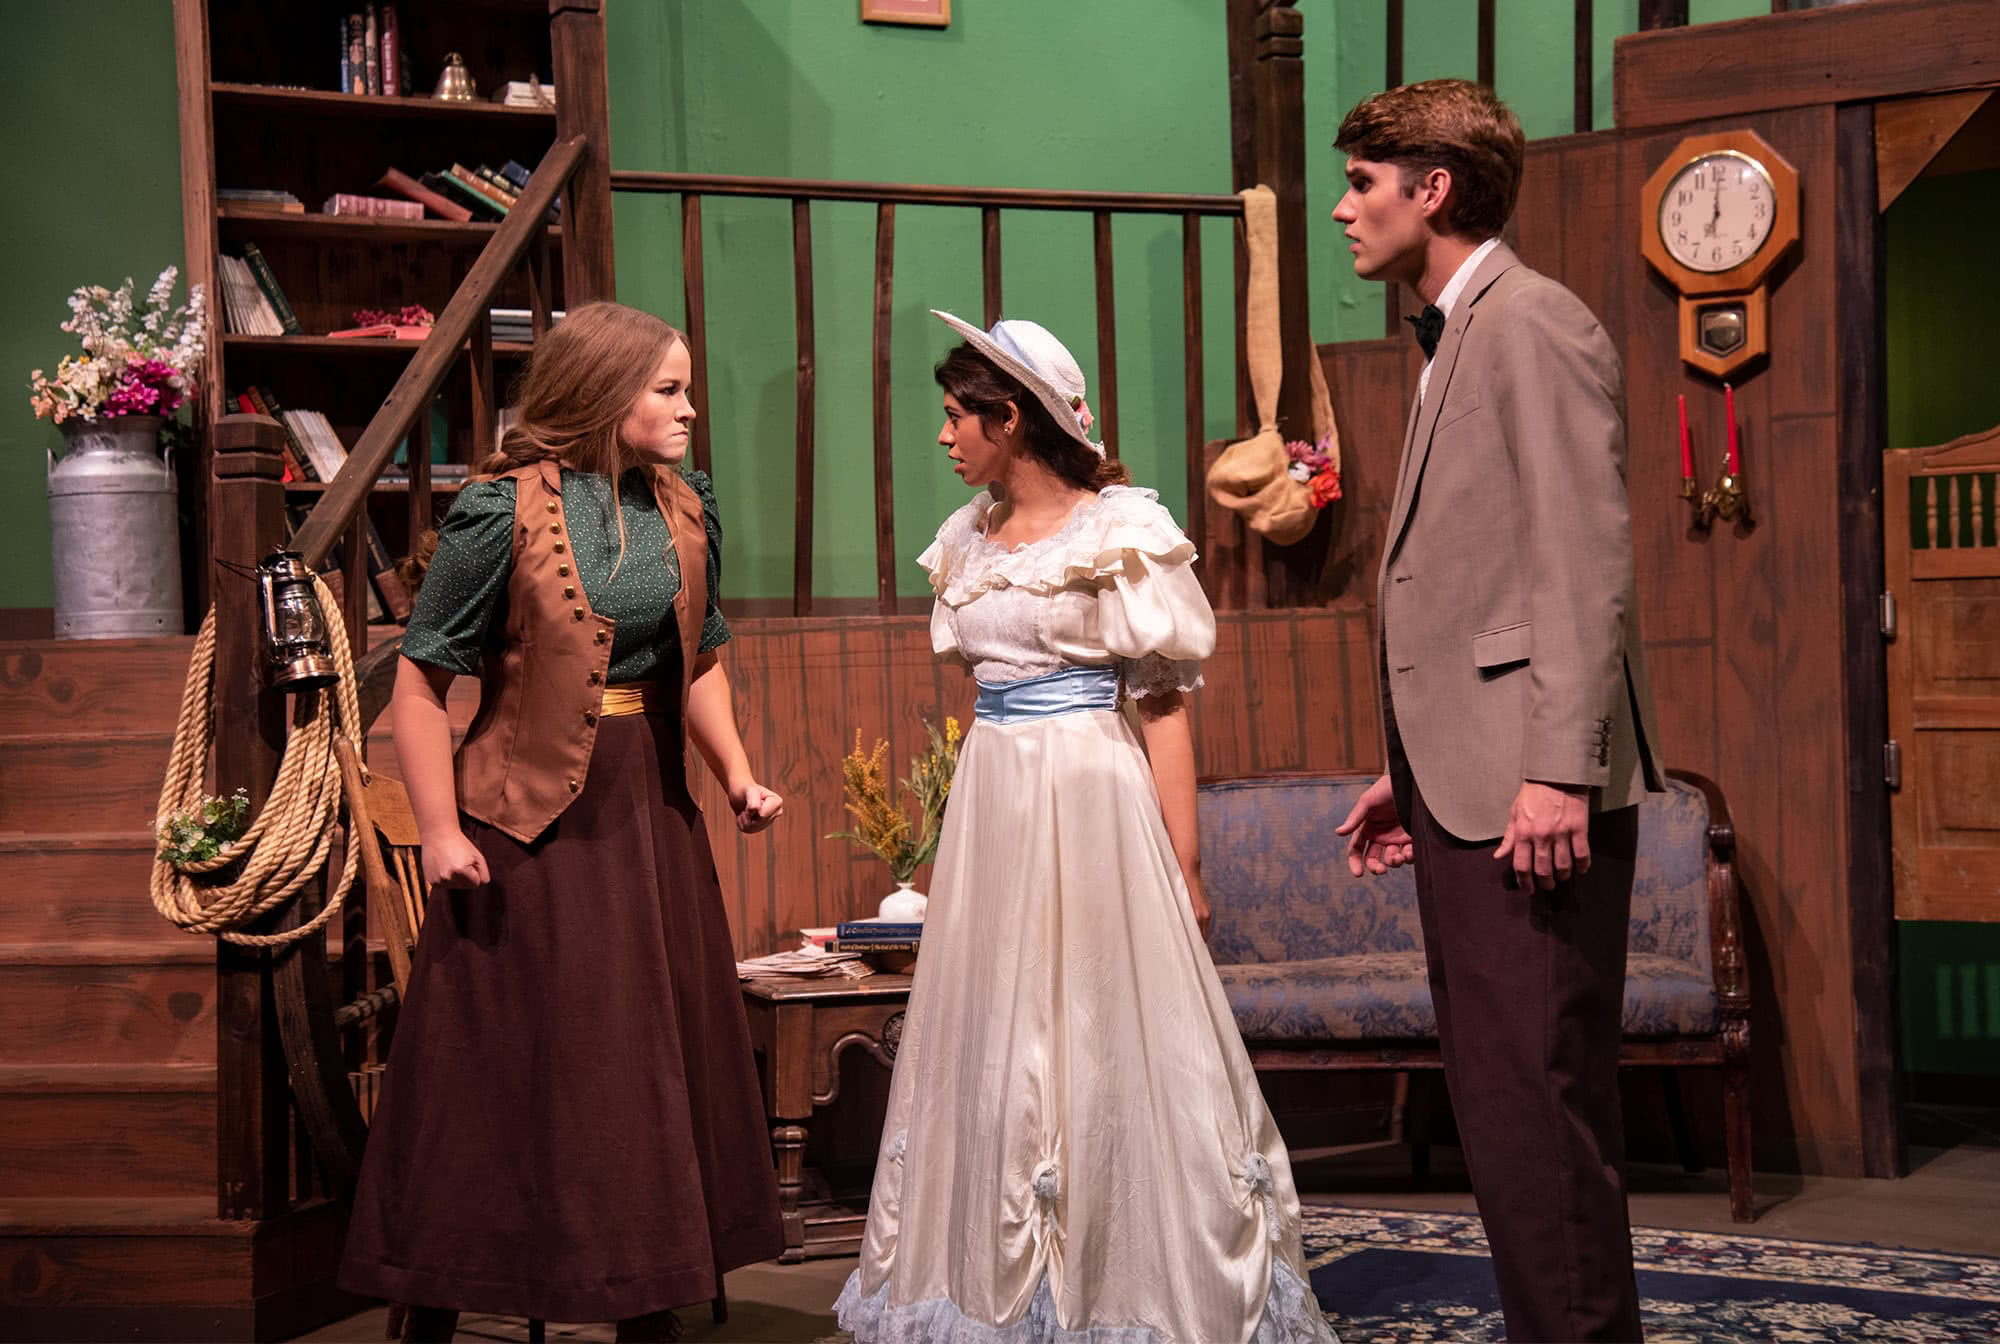 Three students participate in a dramatic production